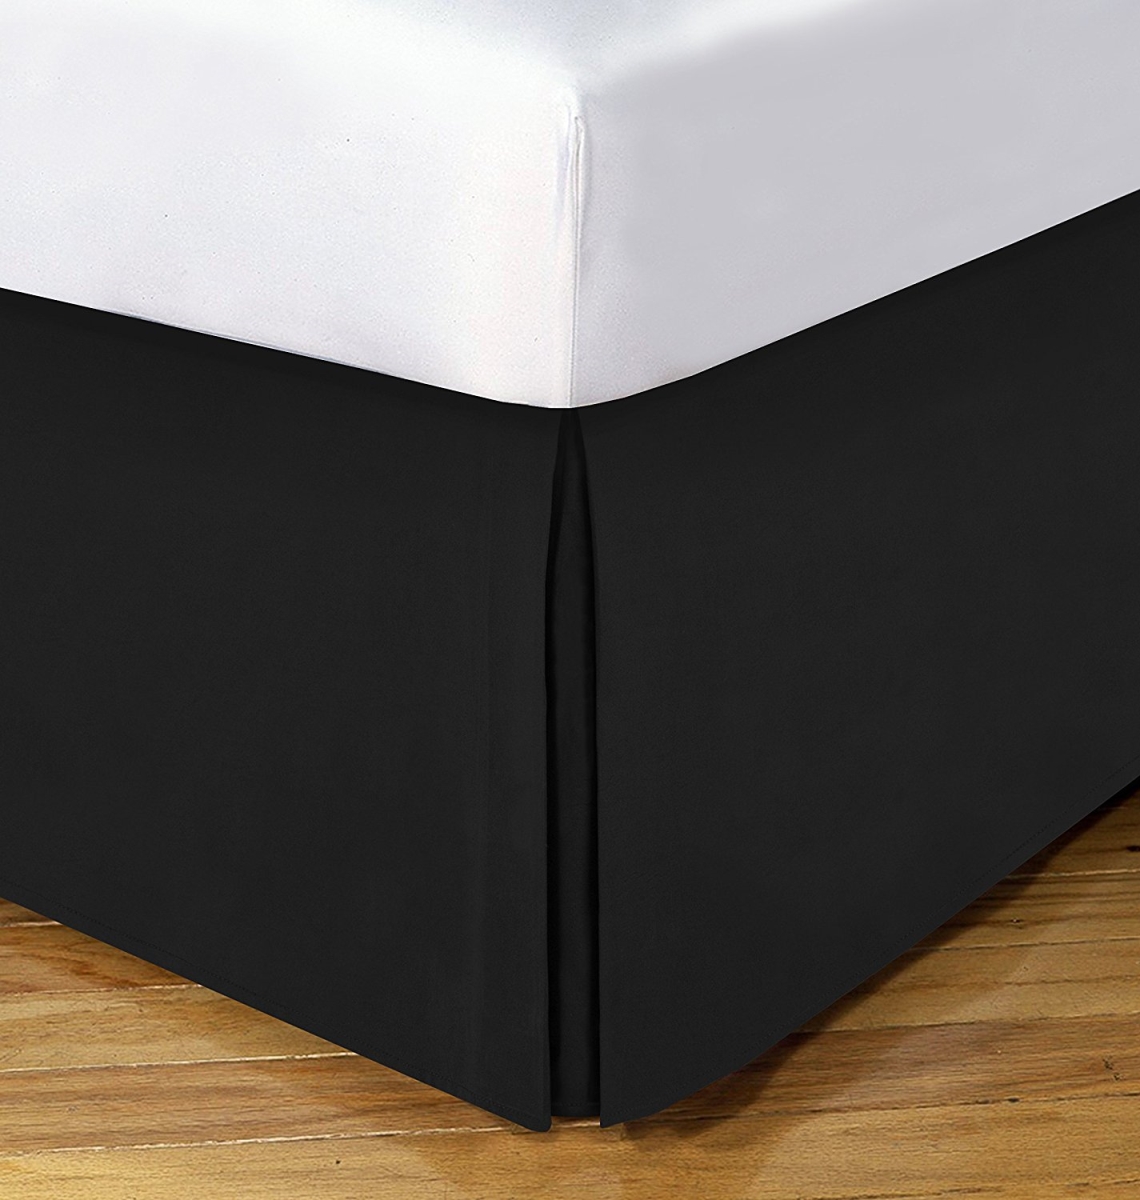 Toh24914blac05 Levinsohn Basic Cotton Rich 200tc Tailored 14 In. Bed Skirt Black - California King